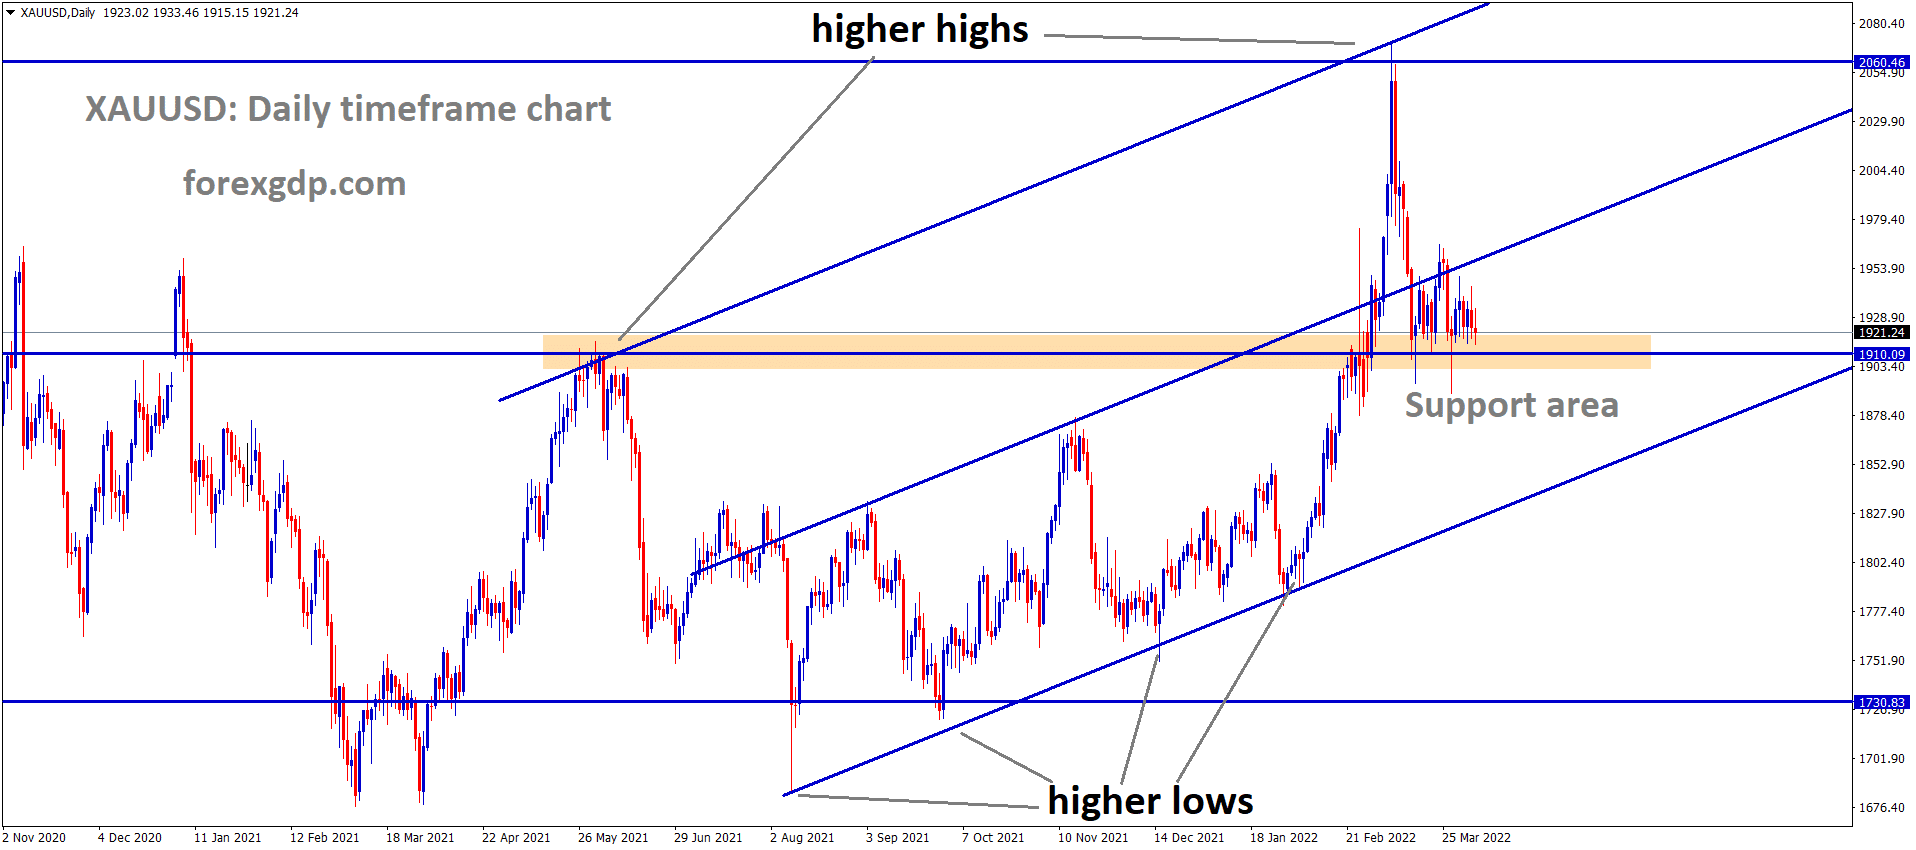 XAUUSD Daily time Frame Market is moving in an Ascending channel and the Market has consolidated at the higher low area of the Horizontal Support area of the Ascending channel.